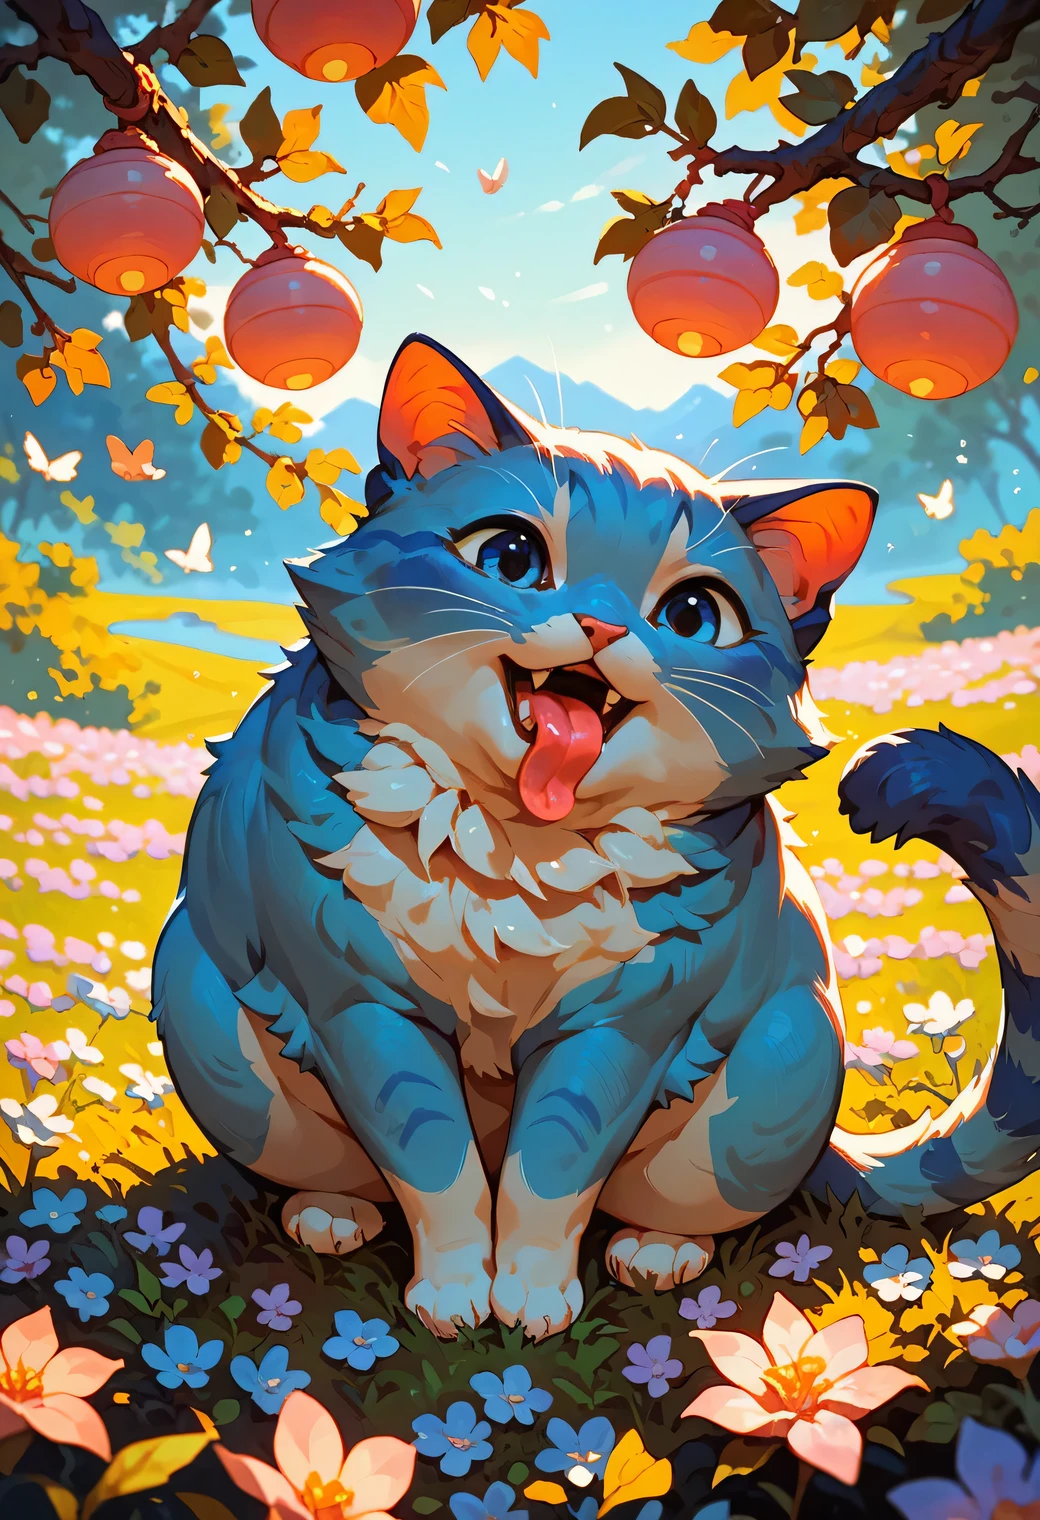 score_9, score_8_up, score_7_up, an adorable cat frolicking, ambient spring, white,blue and pink tetradic colors